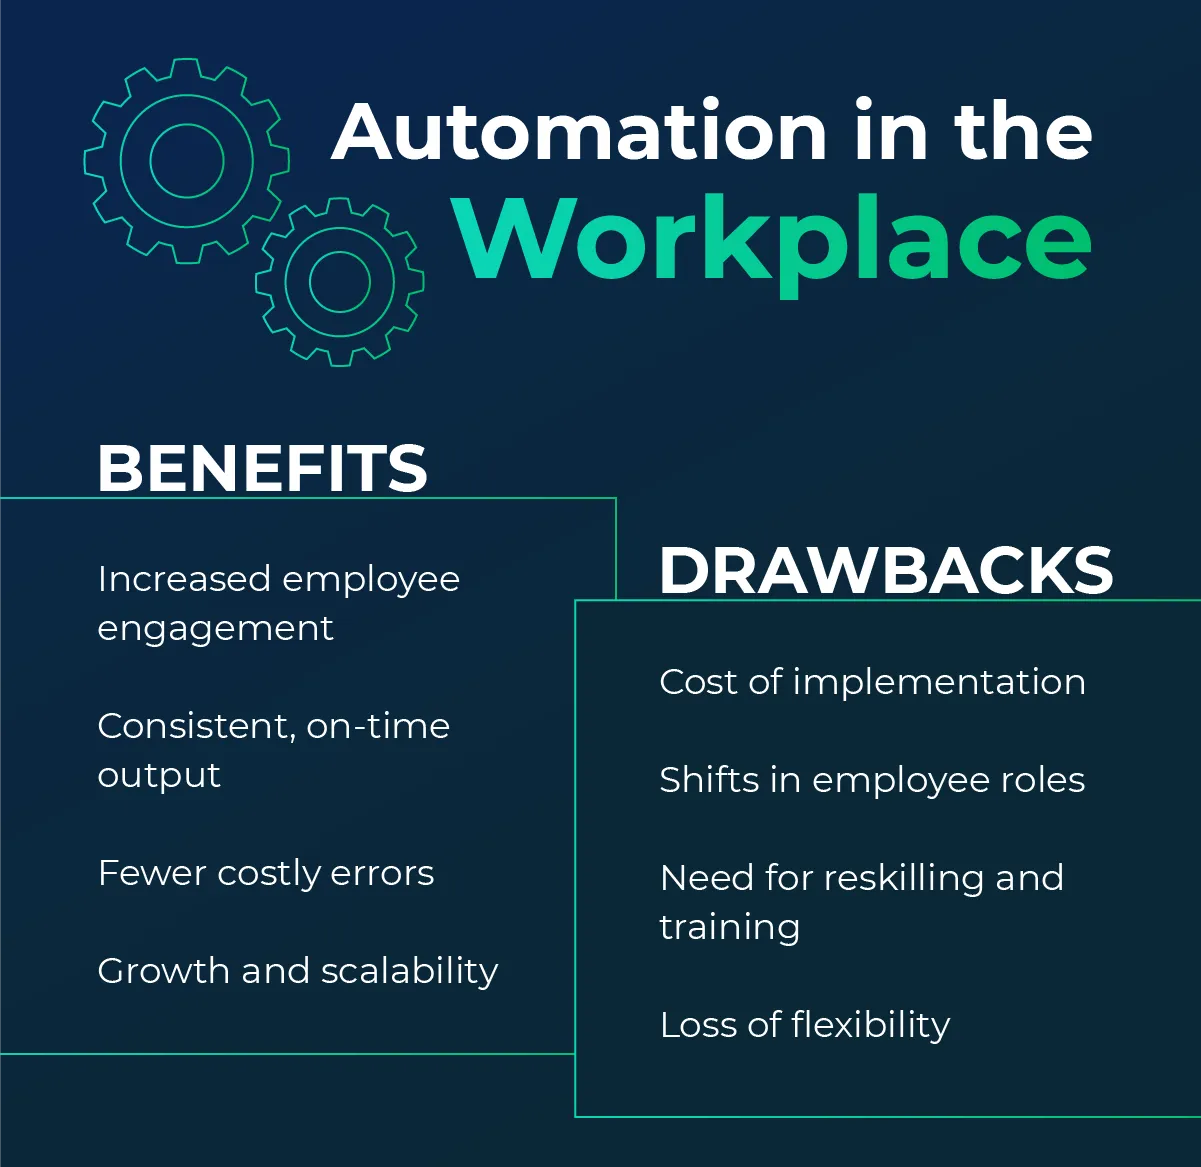 Chart listing the benefits and drawbacks of automation in the workplace